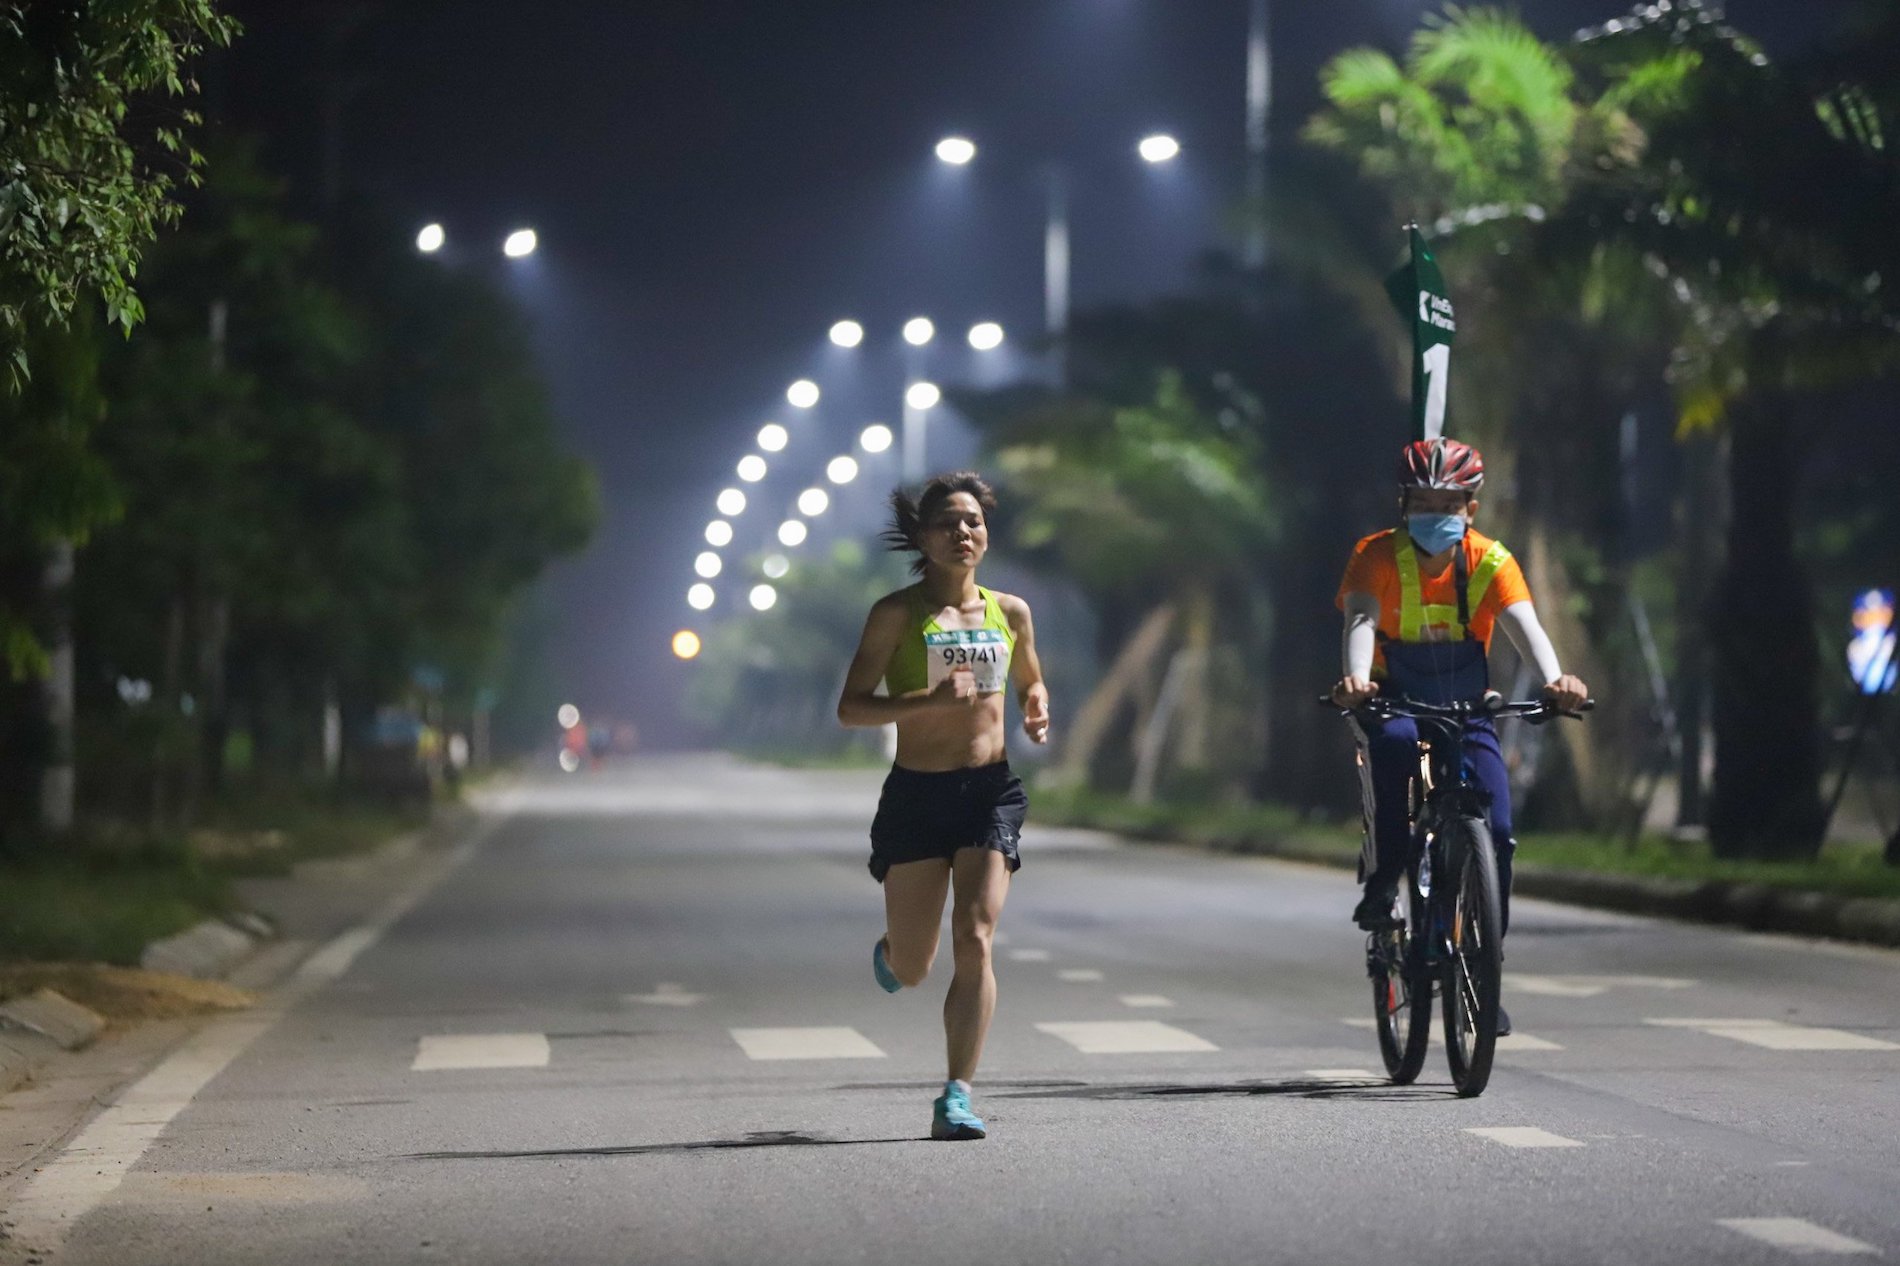 Pham Thi Hue leads among female participants in the full marathon at VM Hue, April 10, 2022. Photo by VnExpress